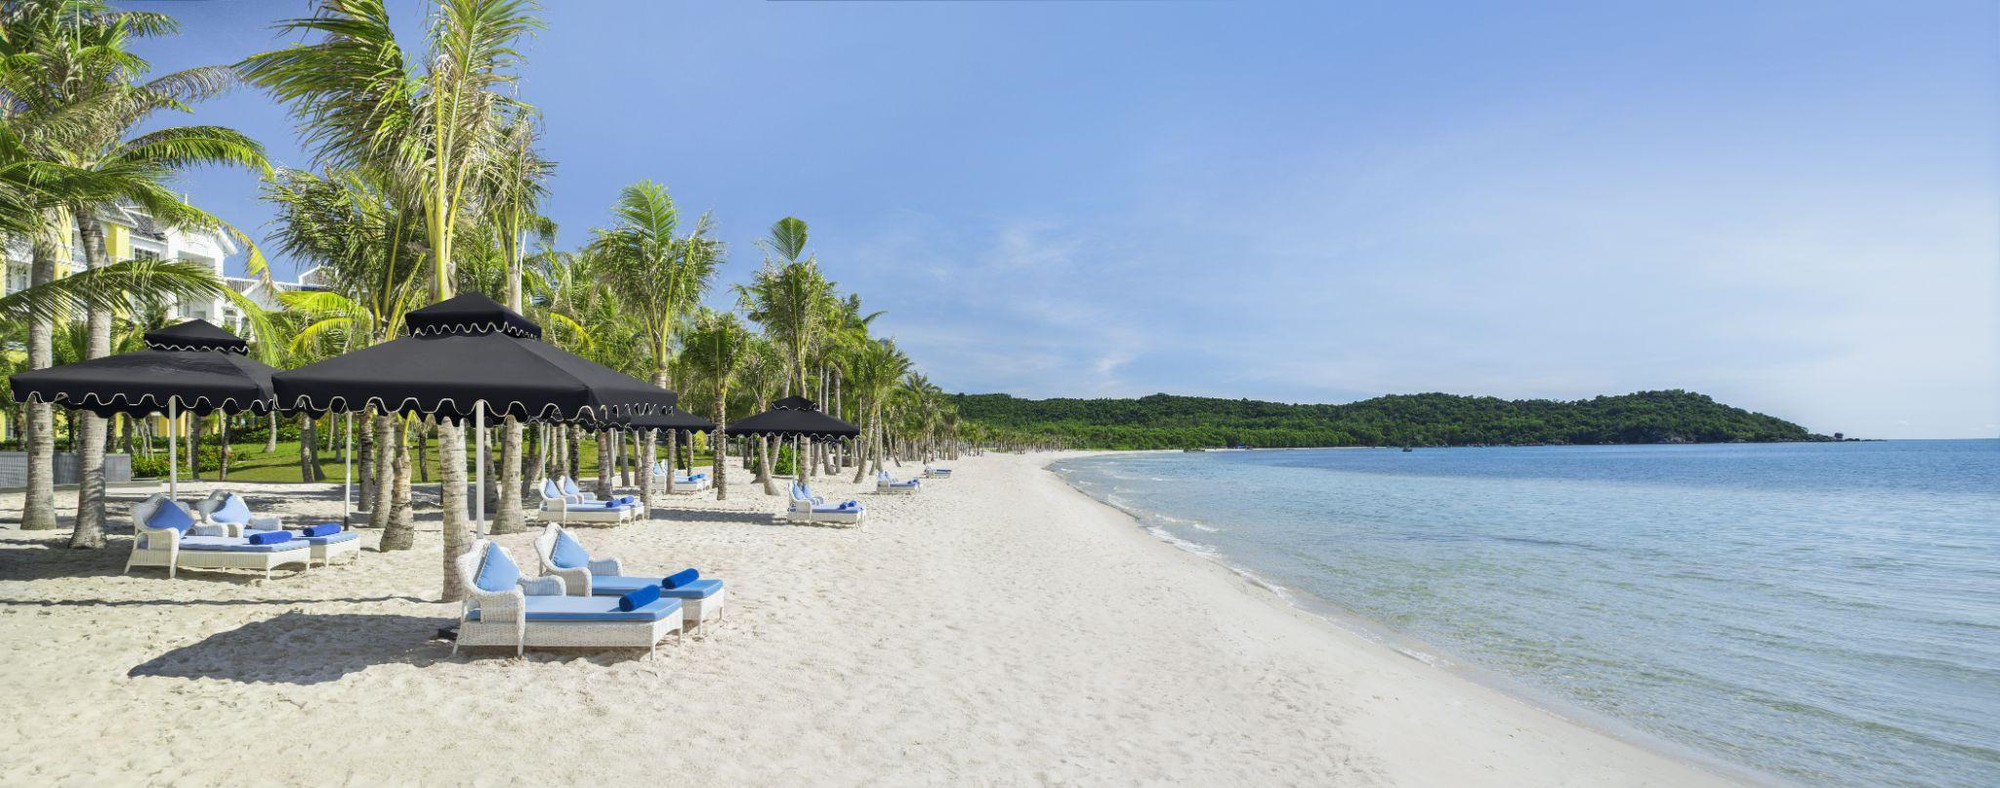 Top 3 Best Beaches in Phu Quoc That Will Steal Your Heart - Ảnh 1.